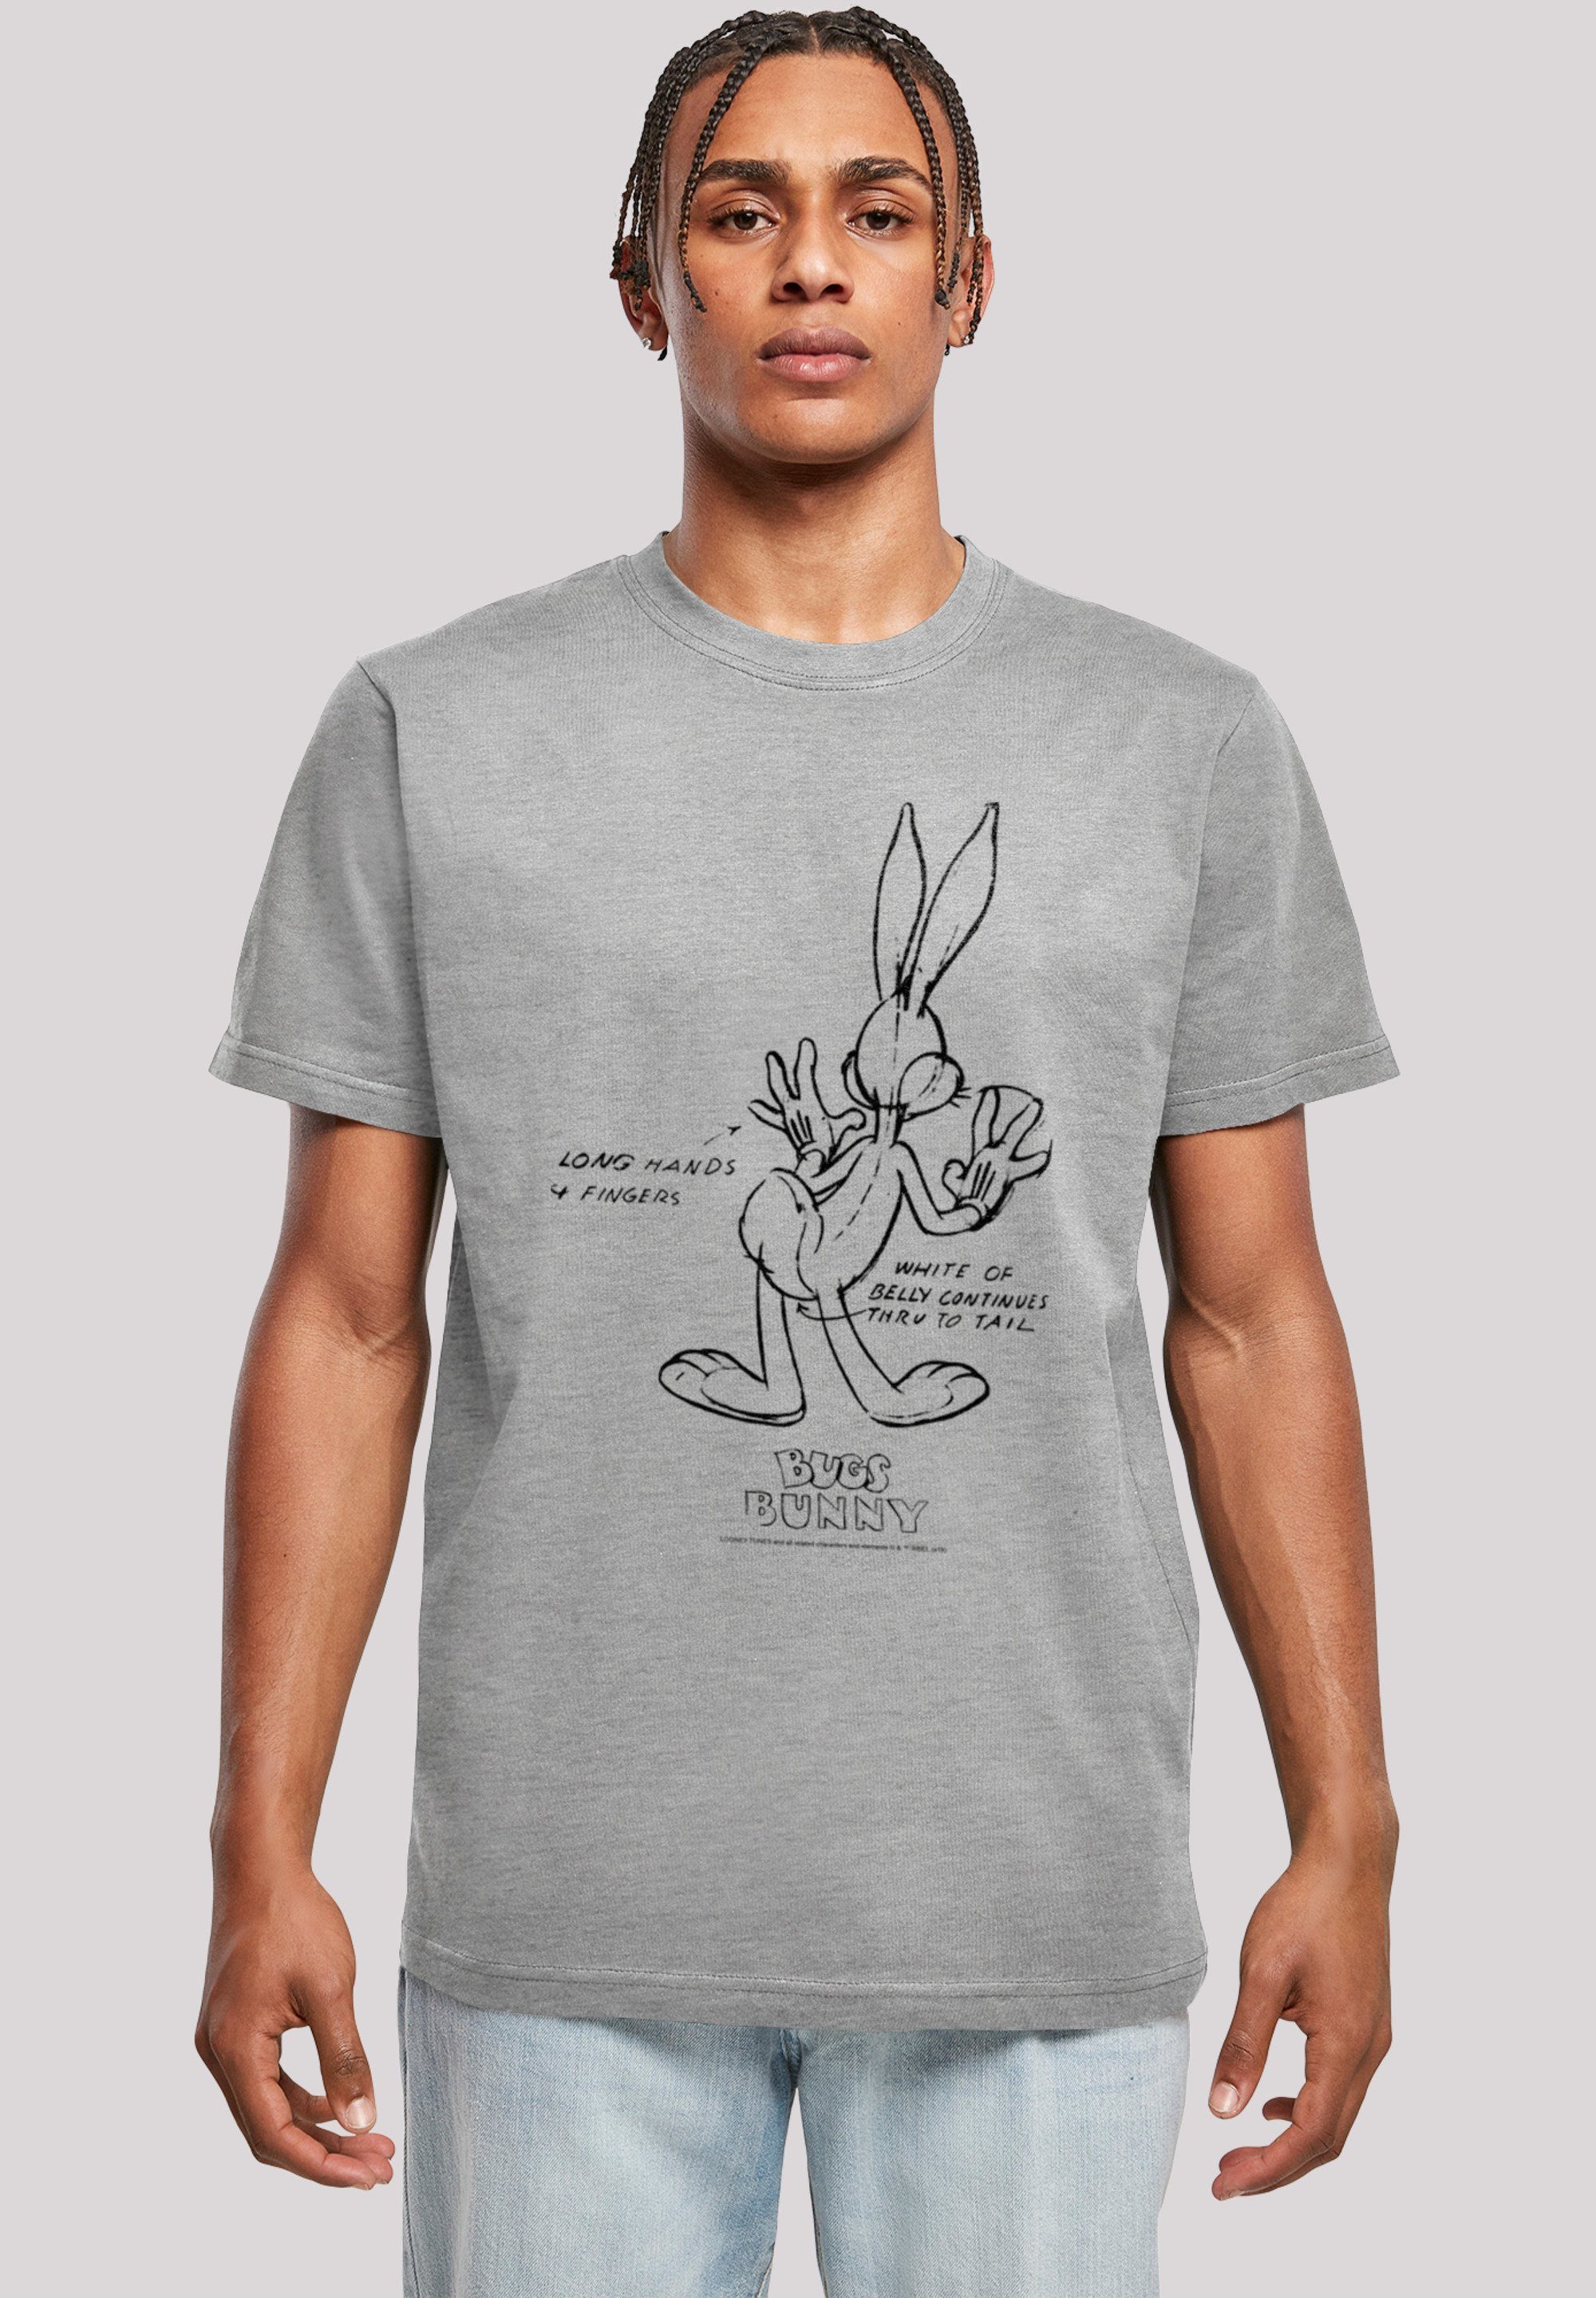 F4NT4STIC T-Shirt Looney White Tunes heather Print Belly Bugs Bunny grey